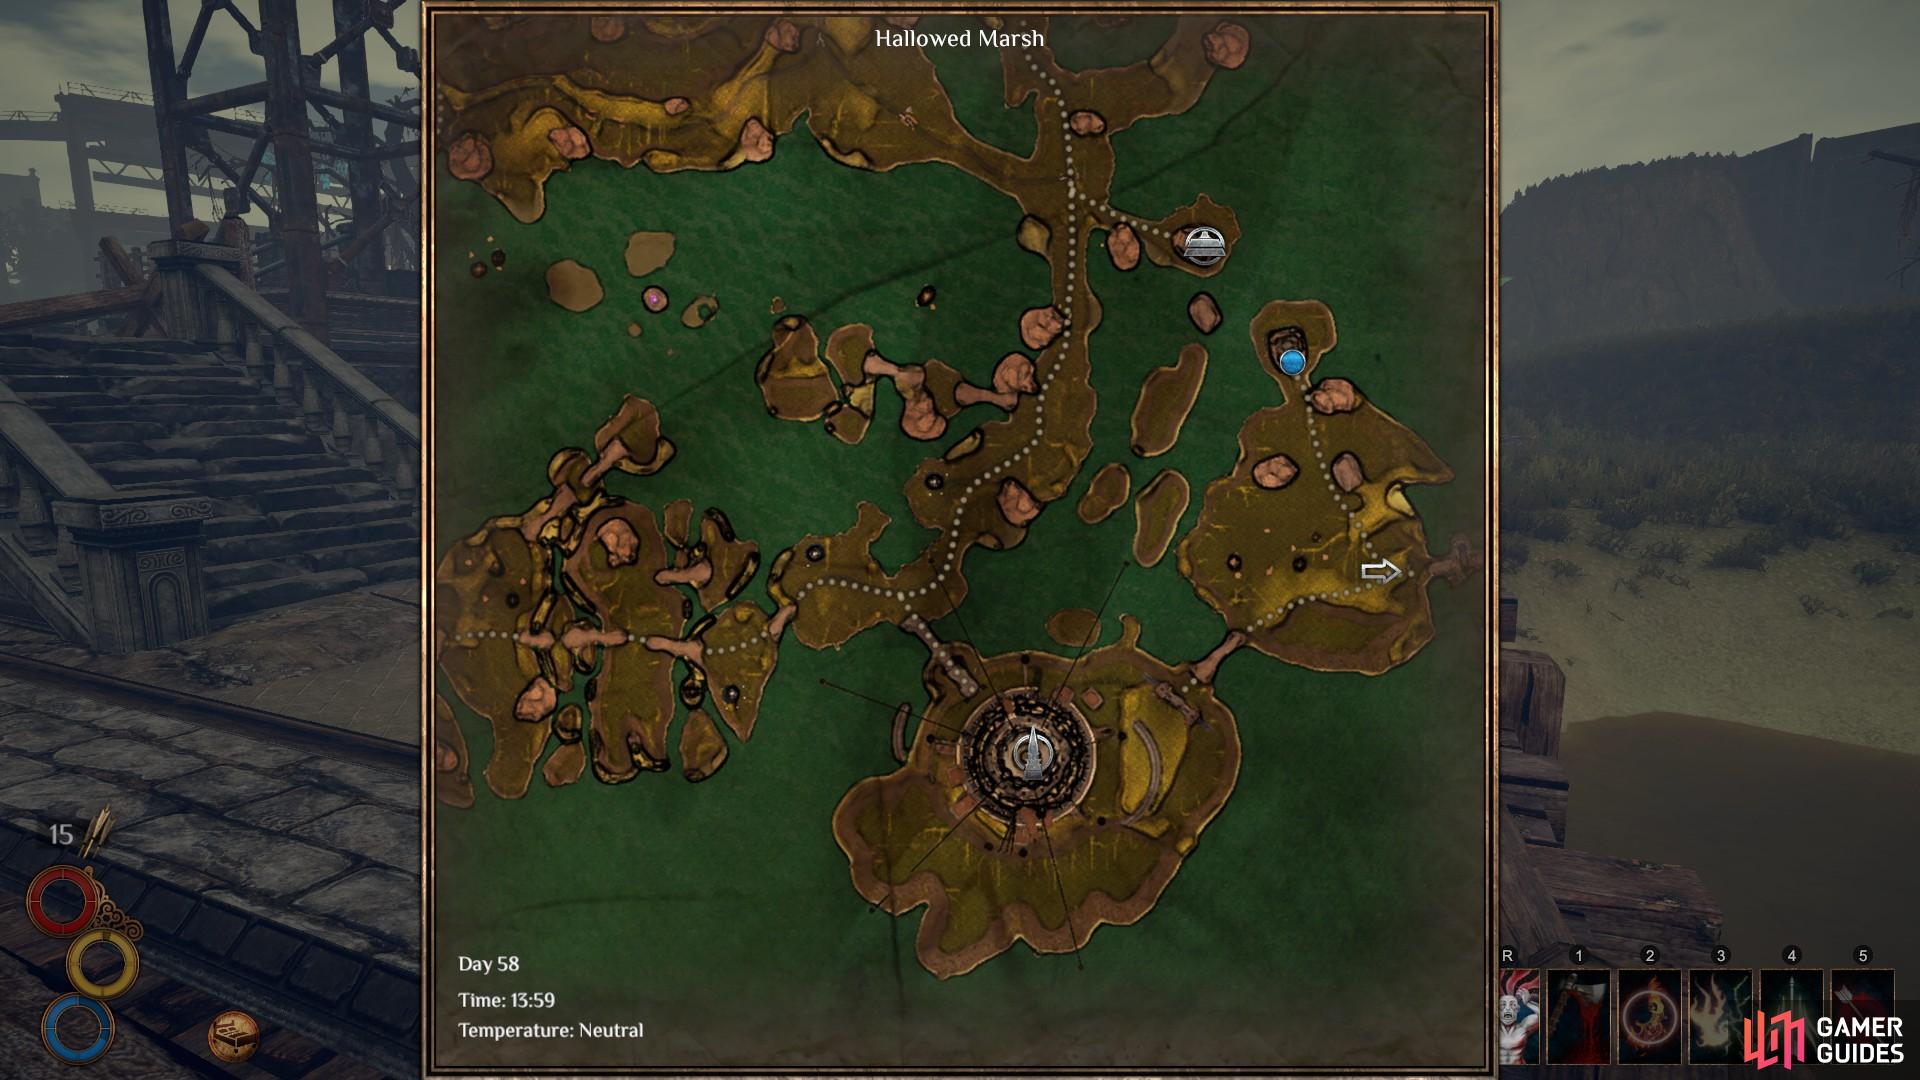 The location of Ziggurat dungeon on the south east corner of the map, marked here by a blue circle.